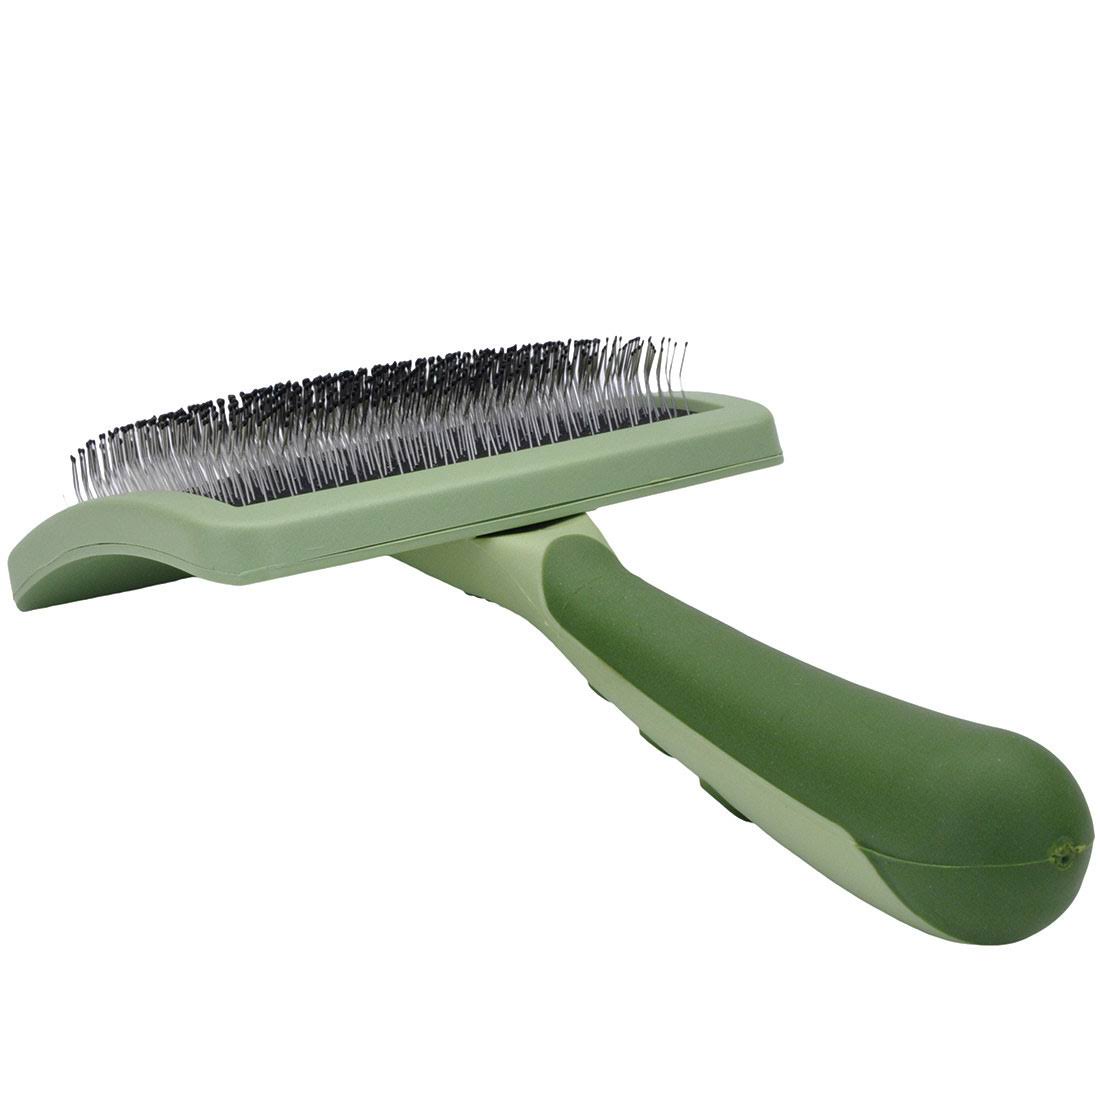 Safari Curved Firm Slicker Brush with Coated Tips for Long Hair (Size: Medium)